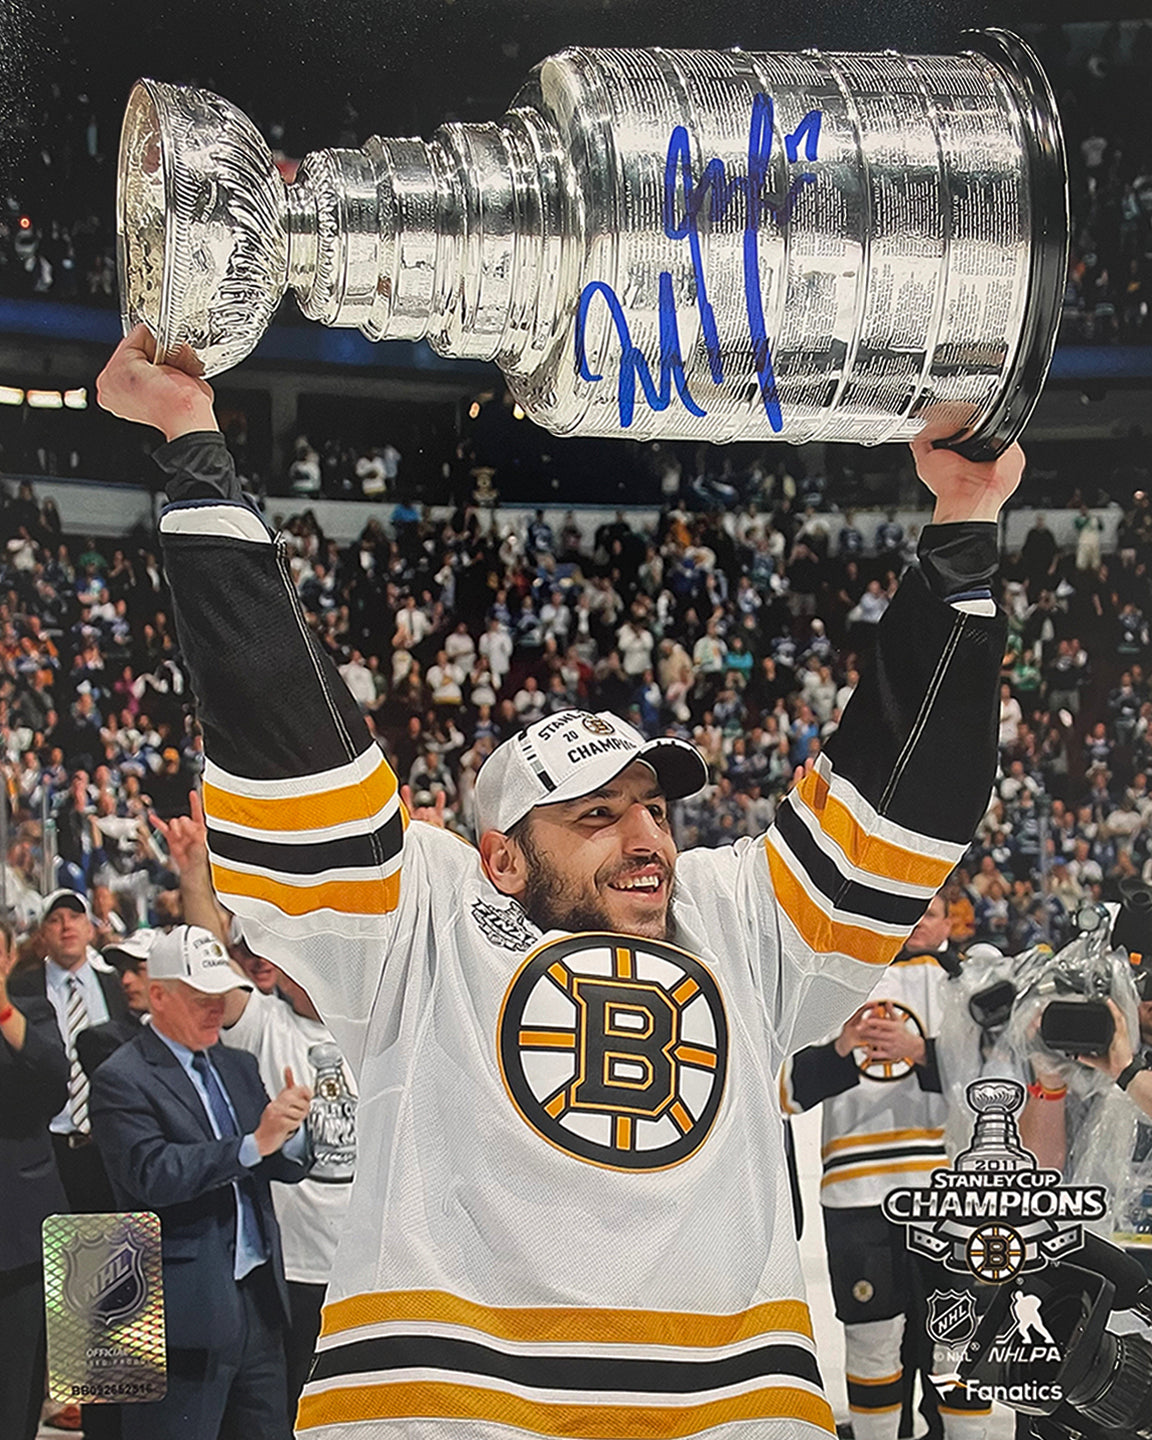 Milan Lucic 2011 Stanley Cup Boston Bruins Autographed 16" x 20" Hockey Photo